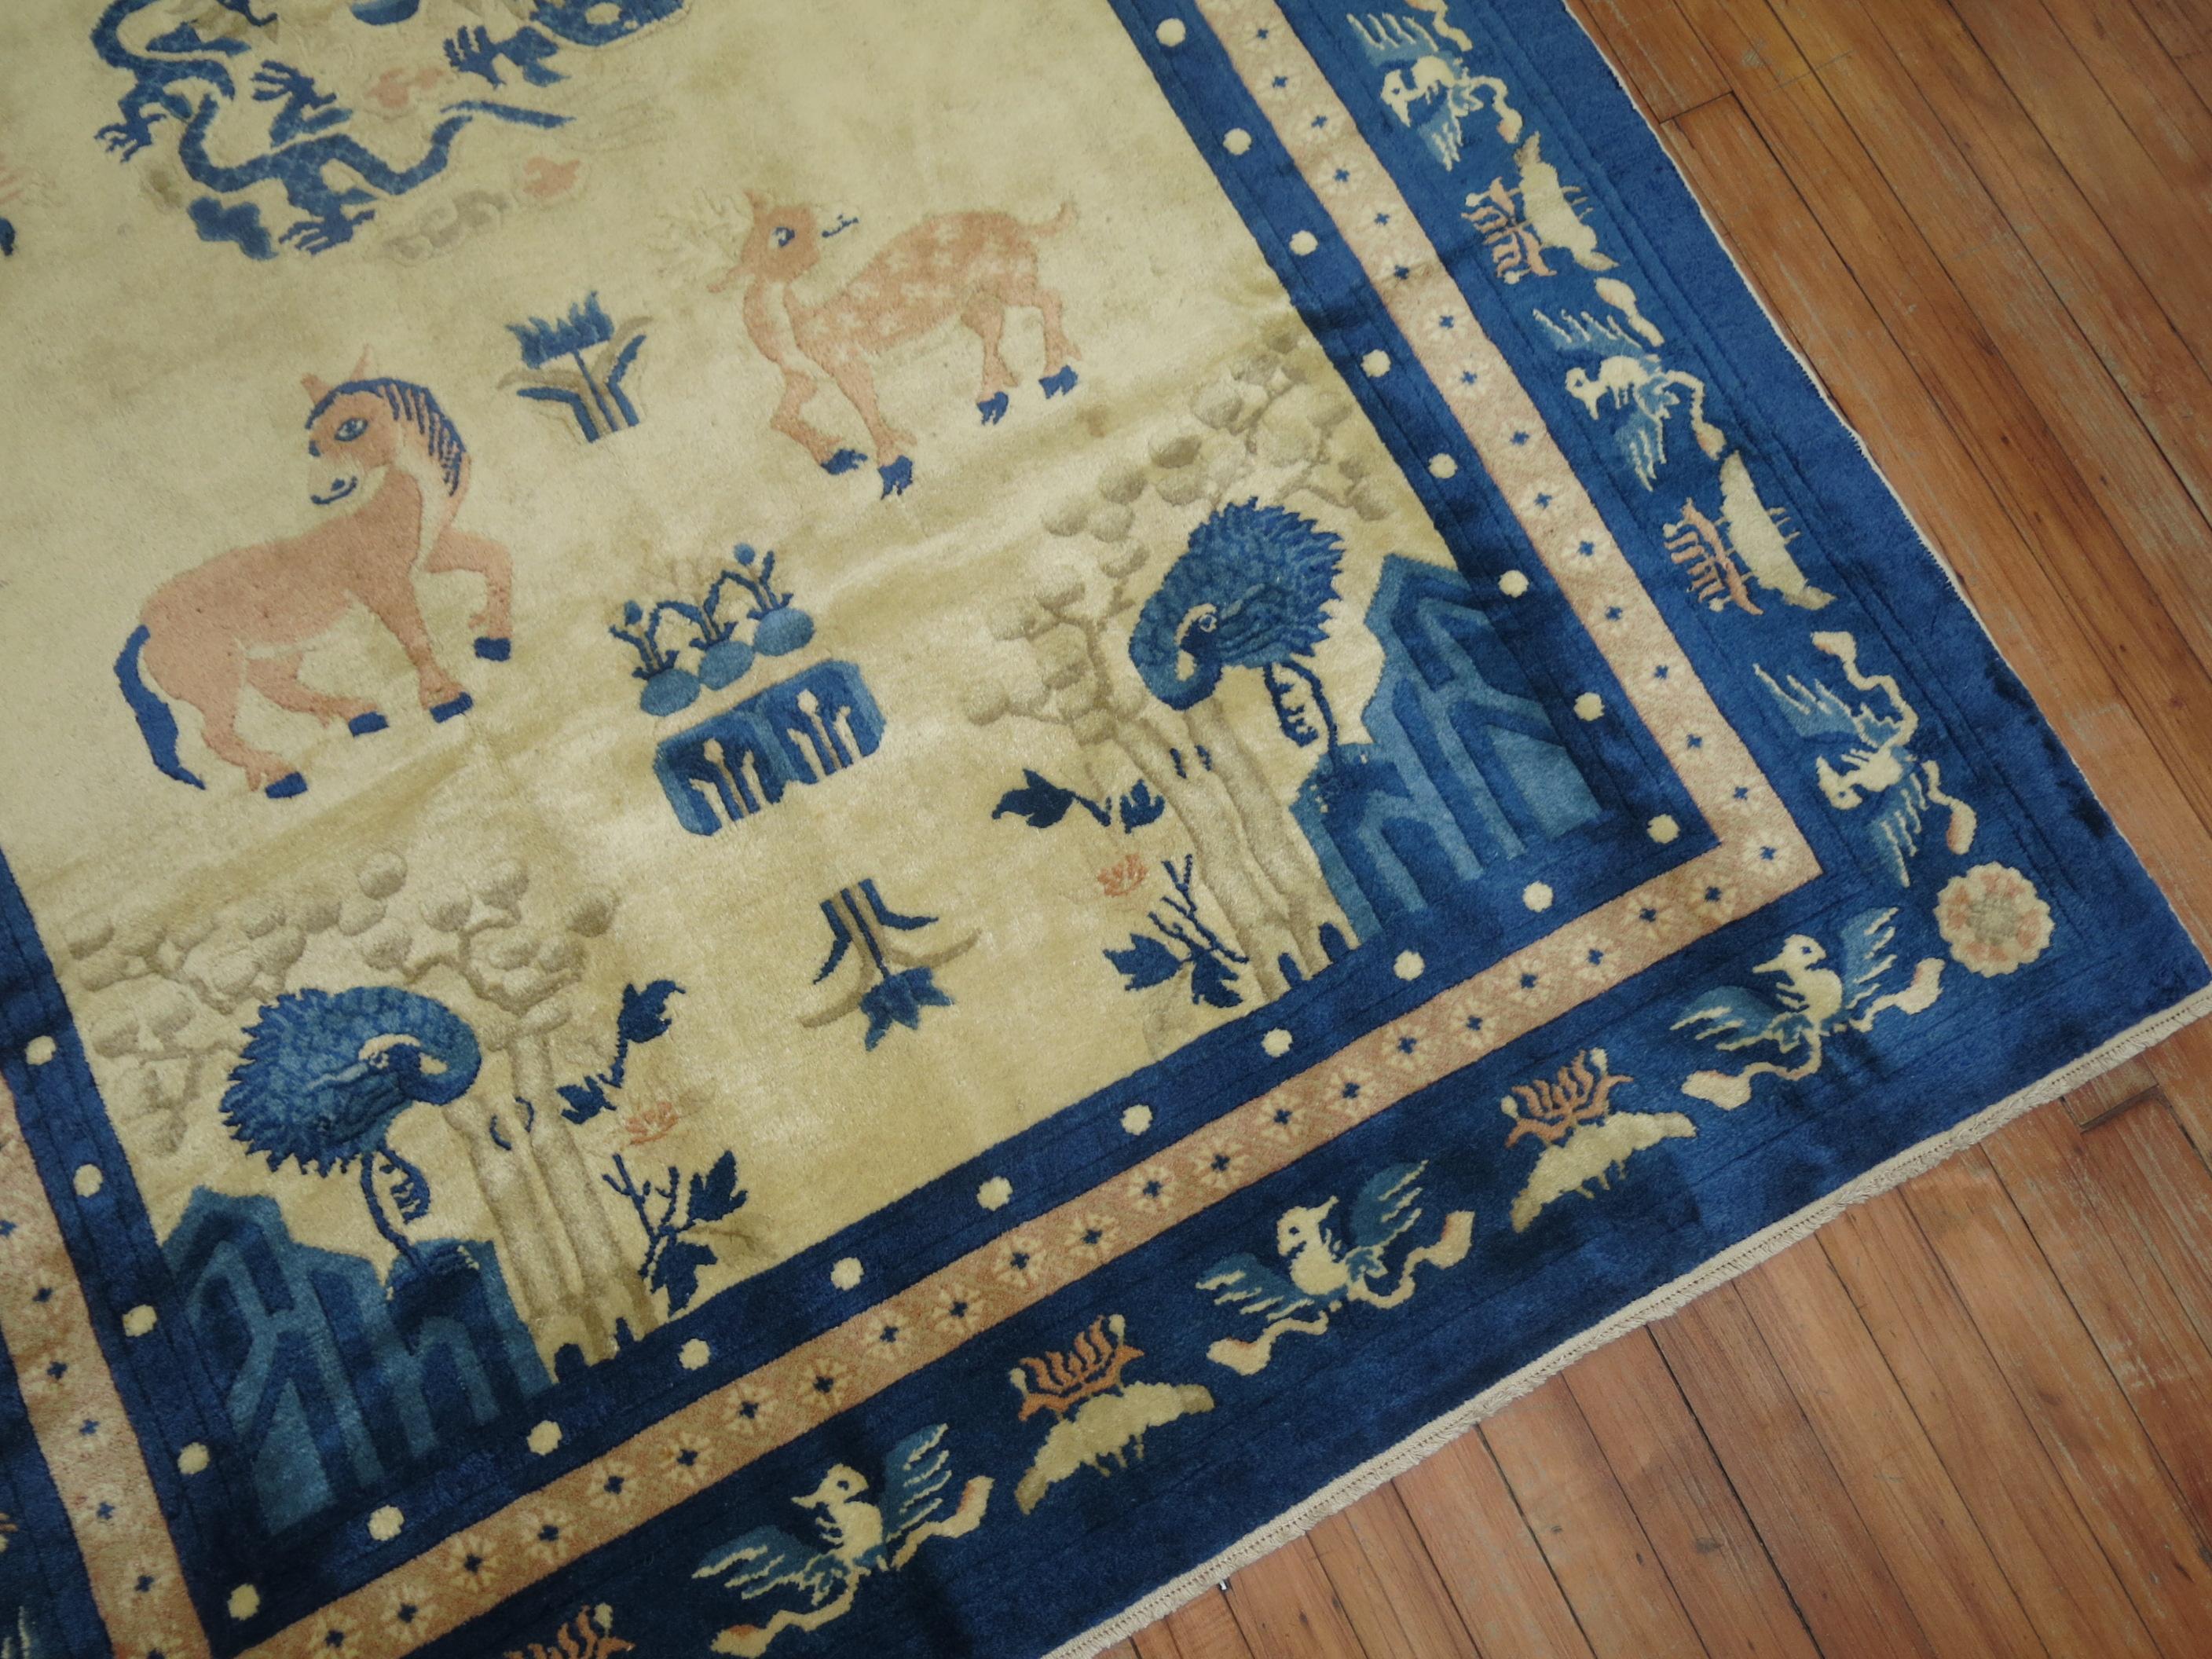 Chinese Antique Pictorial Animal Elephant Rug In Excellent Condition For Sale In New York, NY